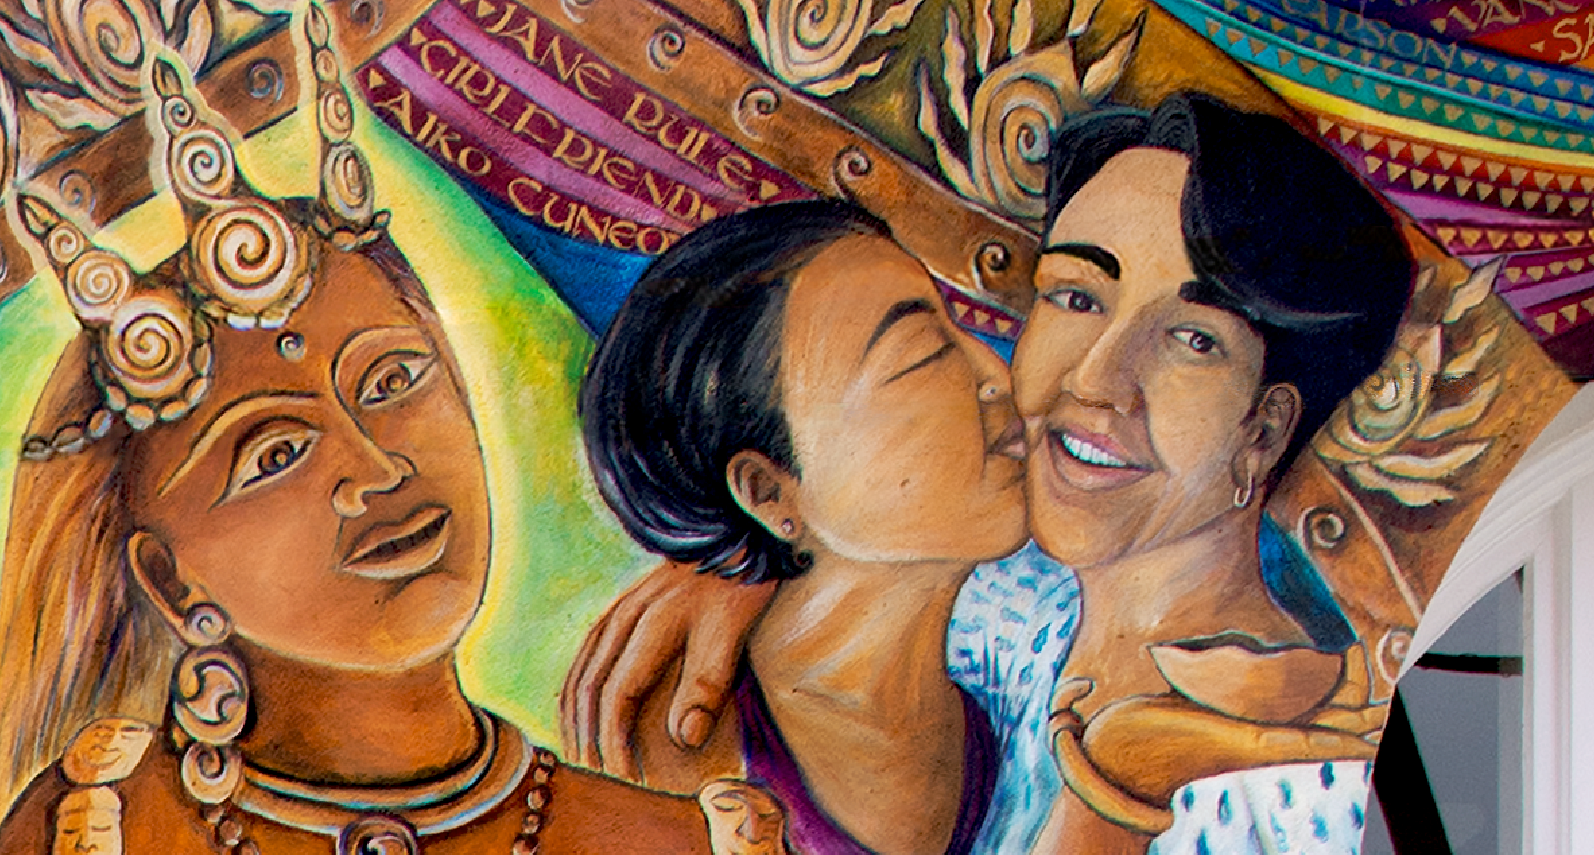 Detail of mural featuring two dark-haired, women embracing. The woman on the right is smiling and the woman on the left kisses her on the cheek. To their left is a South Asian deity wearing a three-pronged crown and ornamental earrings and jewelry.